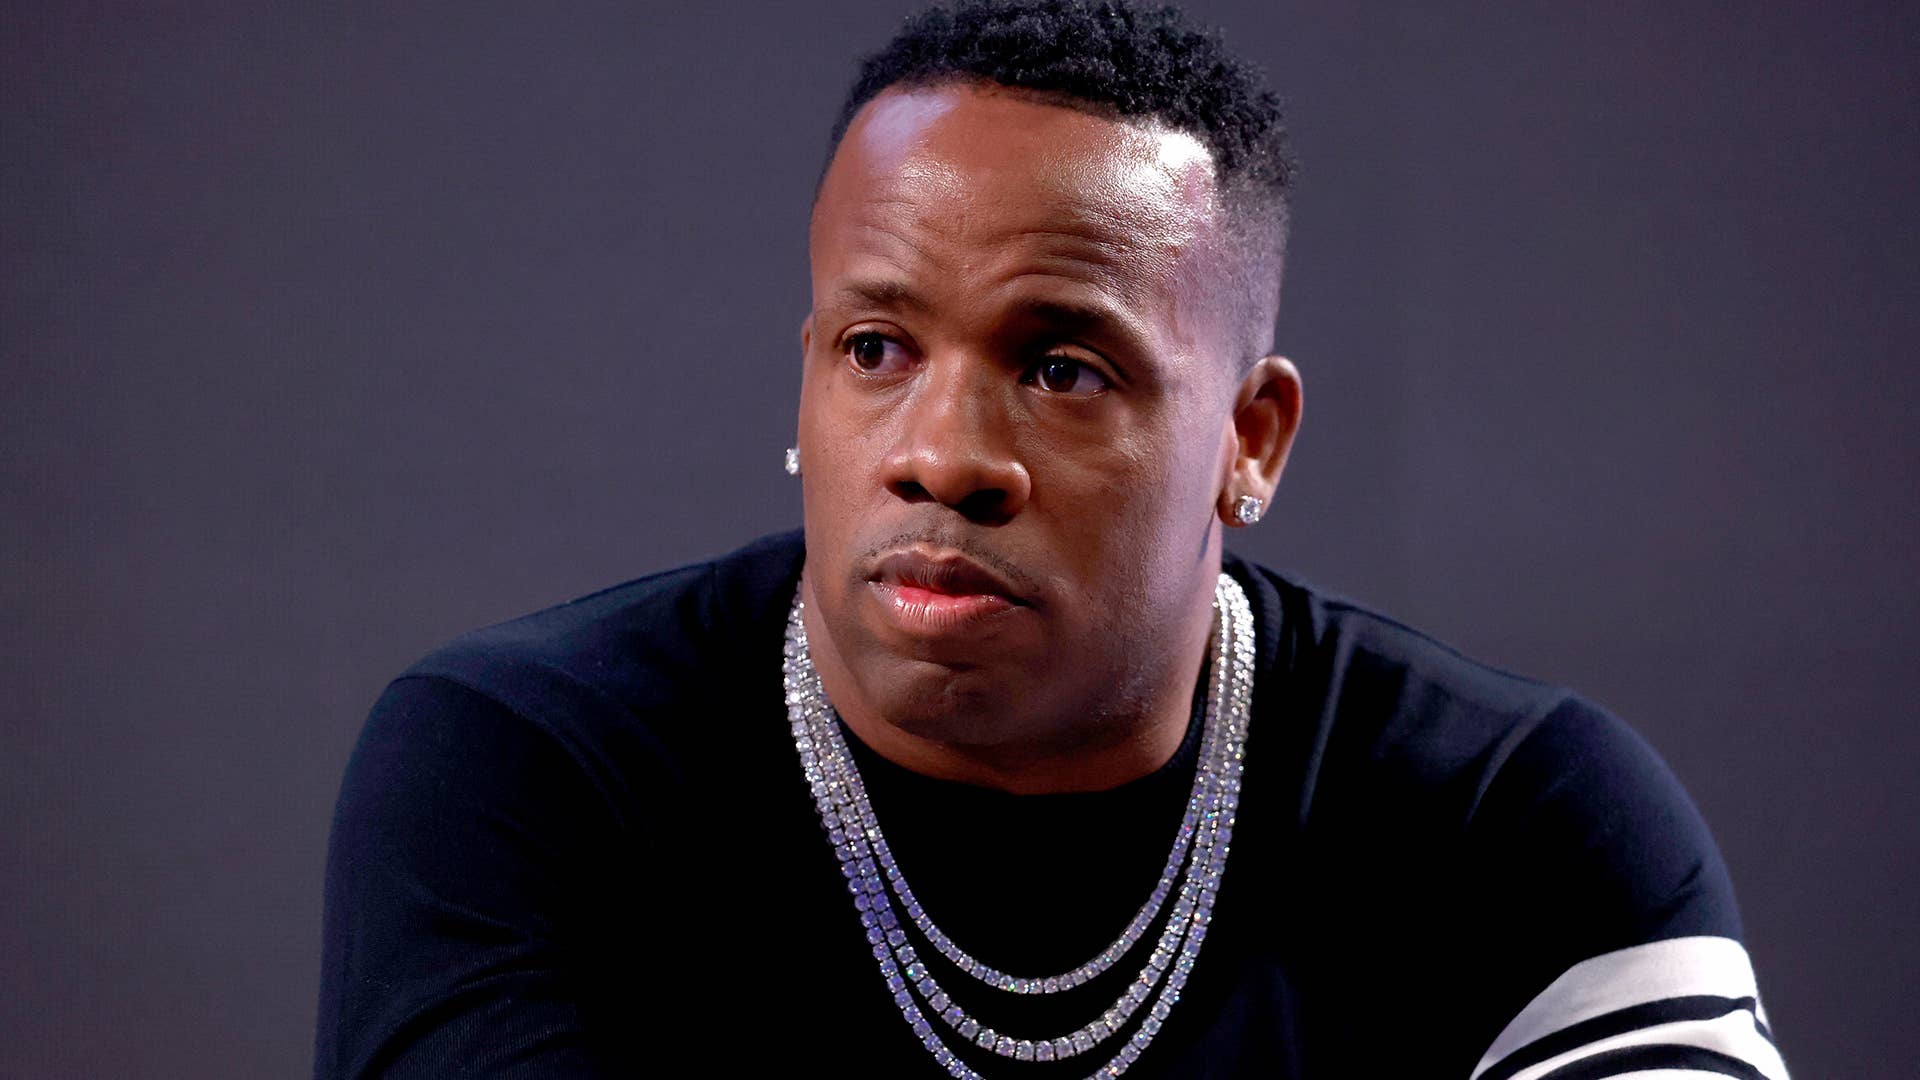 This is a photo of Yo Gotti.